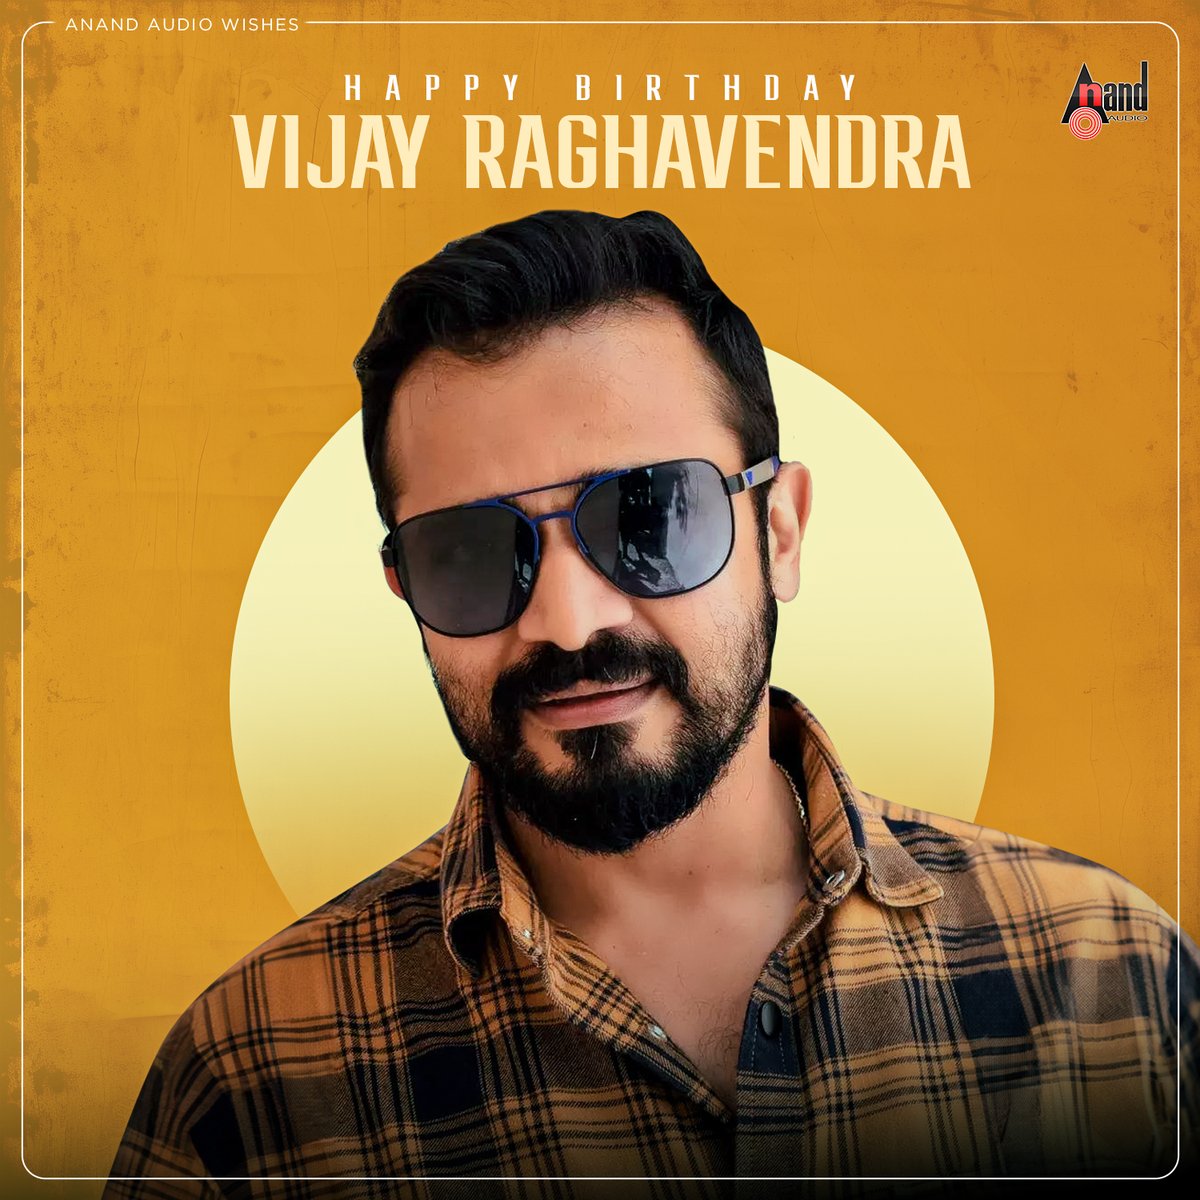 Wising The Humble, Simplicity & Lovable Actor @mutthuvijay Sir a Very Happy Birthday💝 May This Year Brings You More Success & Courage To Meet All Your Endeavors🎂💐 rb.gy/wmxuql #VijayRaghavendra #happybirthday #AnandAudio @aanandaaudio